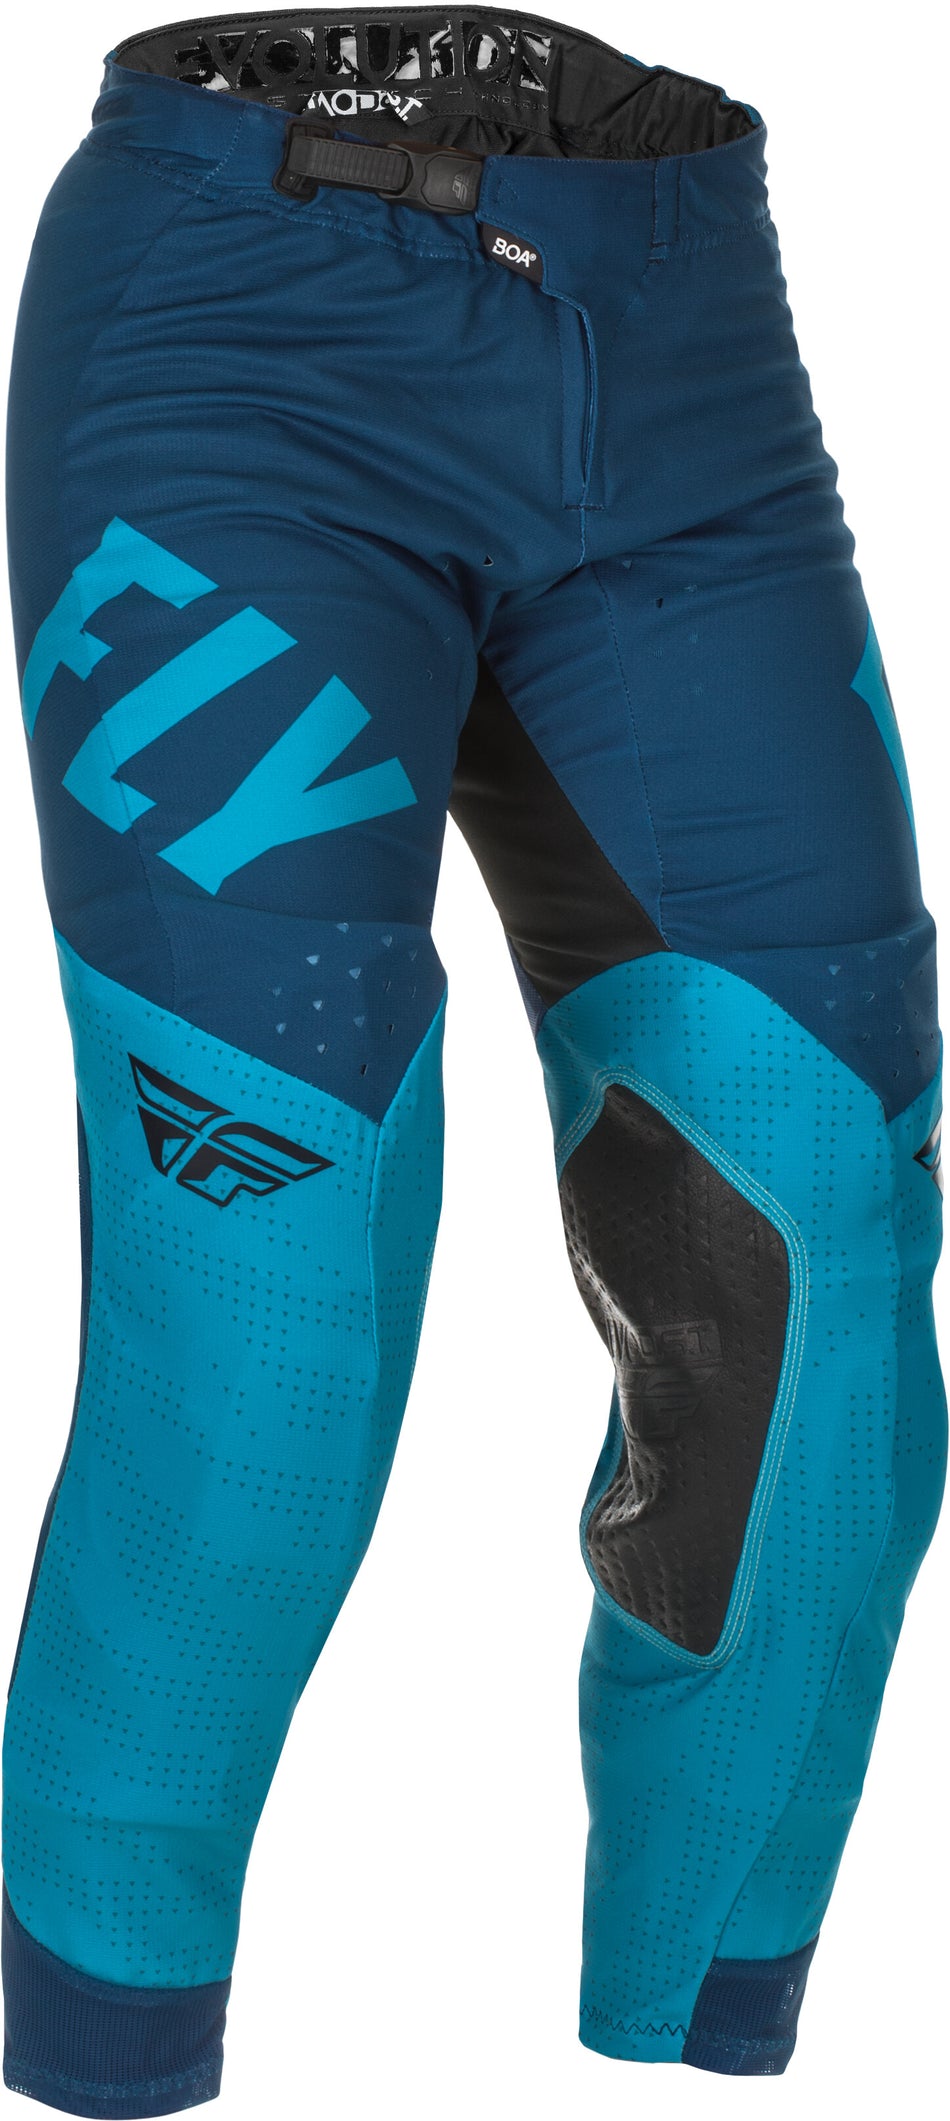 FLY RACING Evolution Dst Pants Blue/Navy Sz 30 374-13130